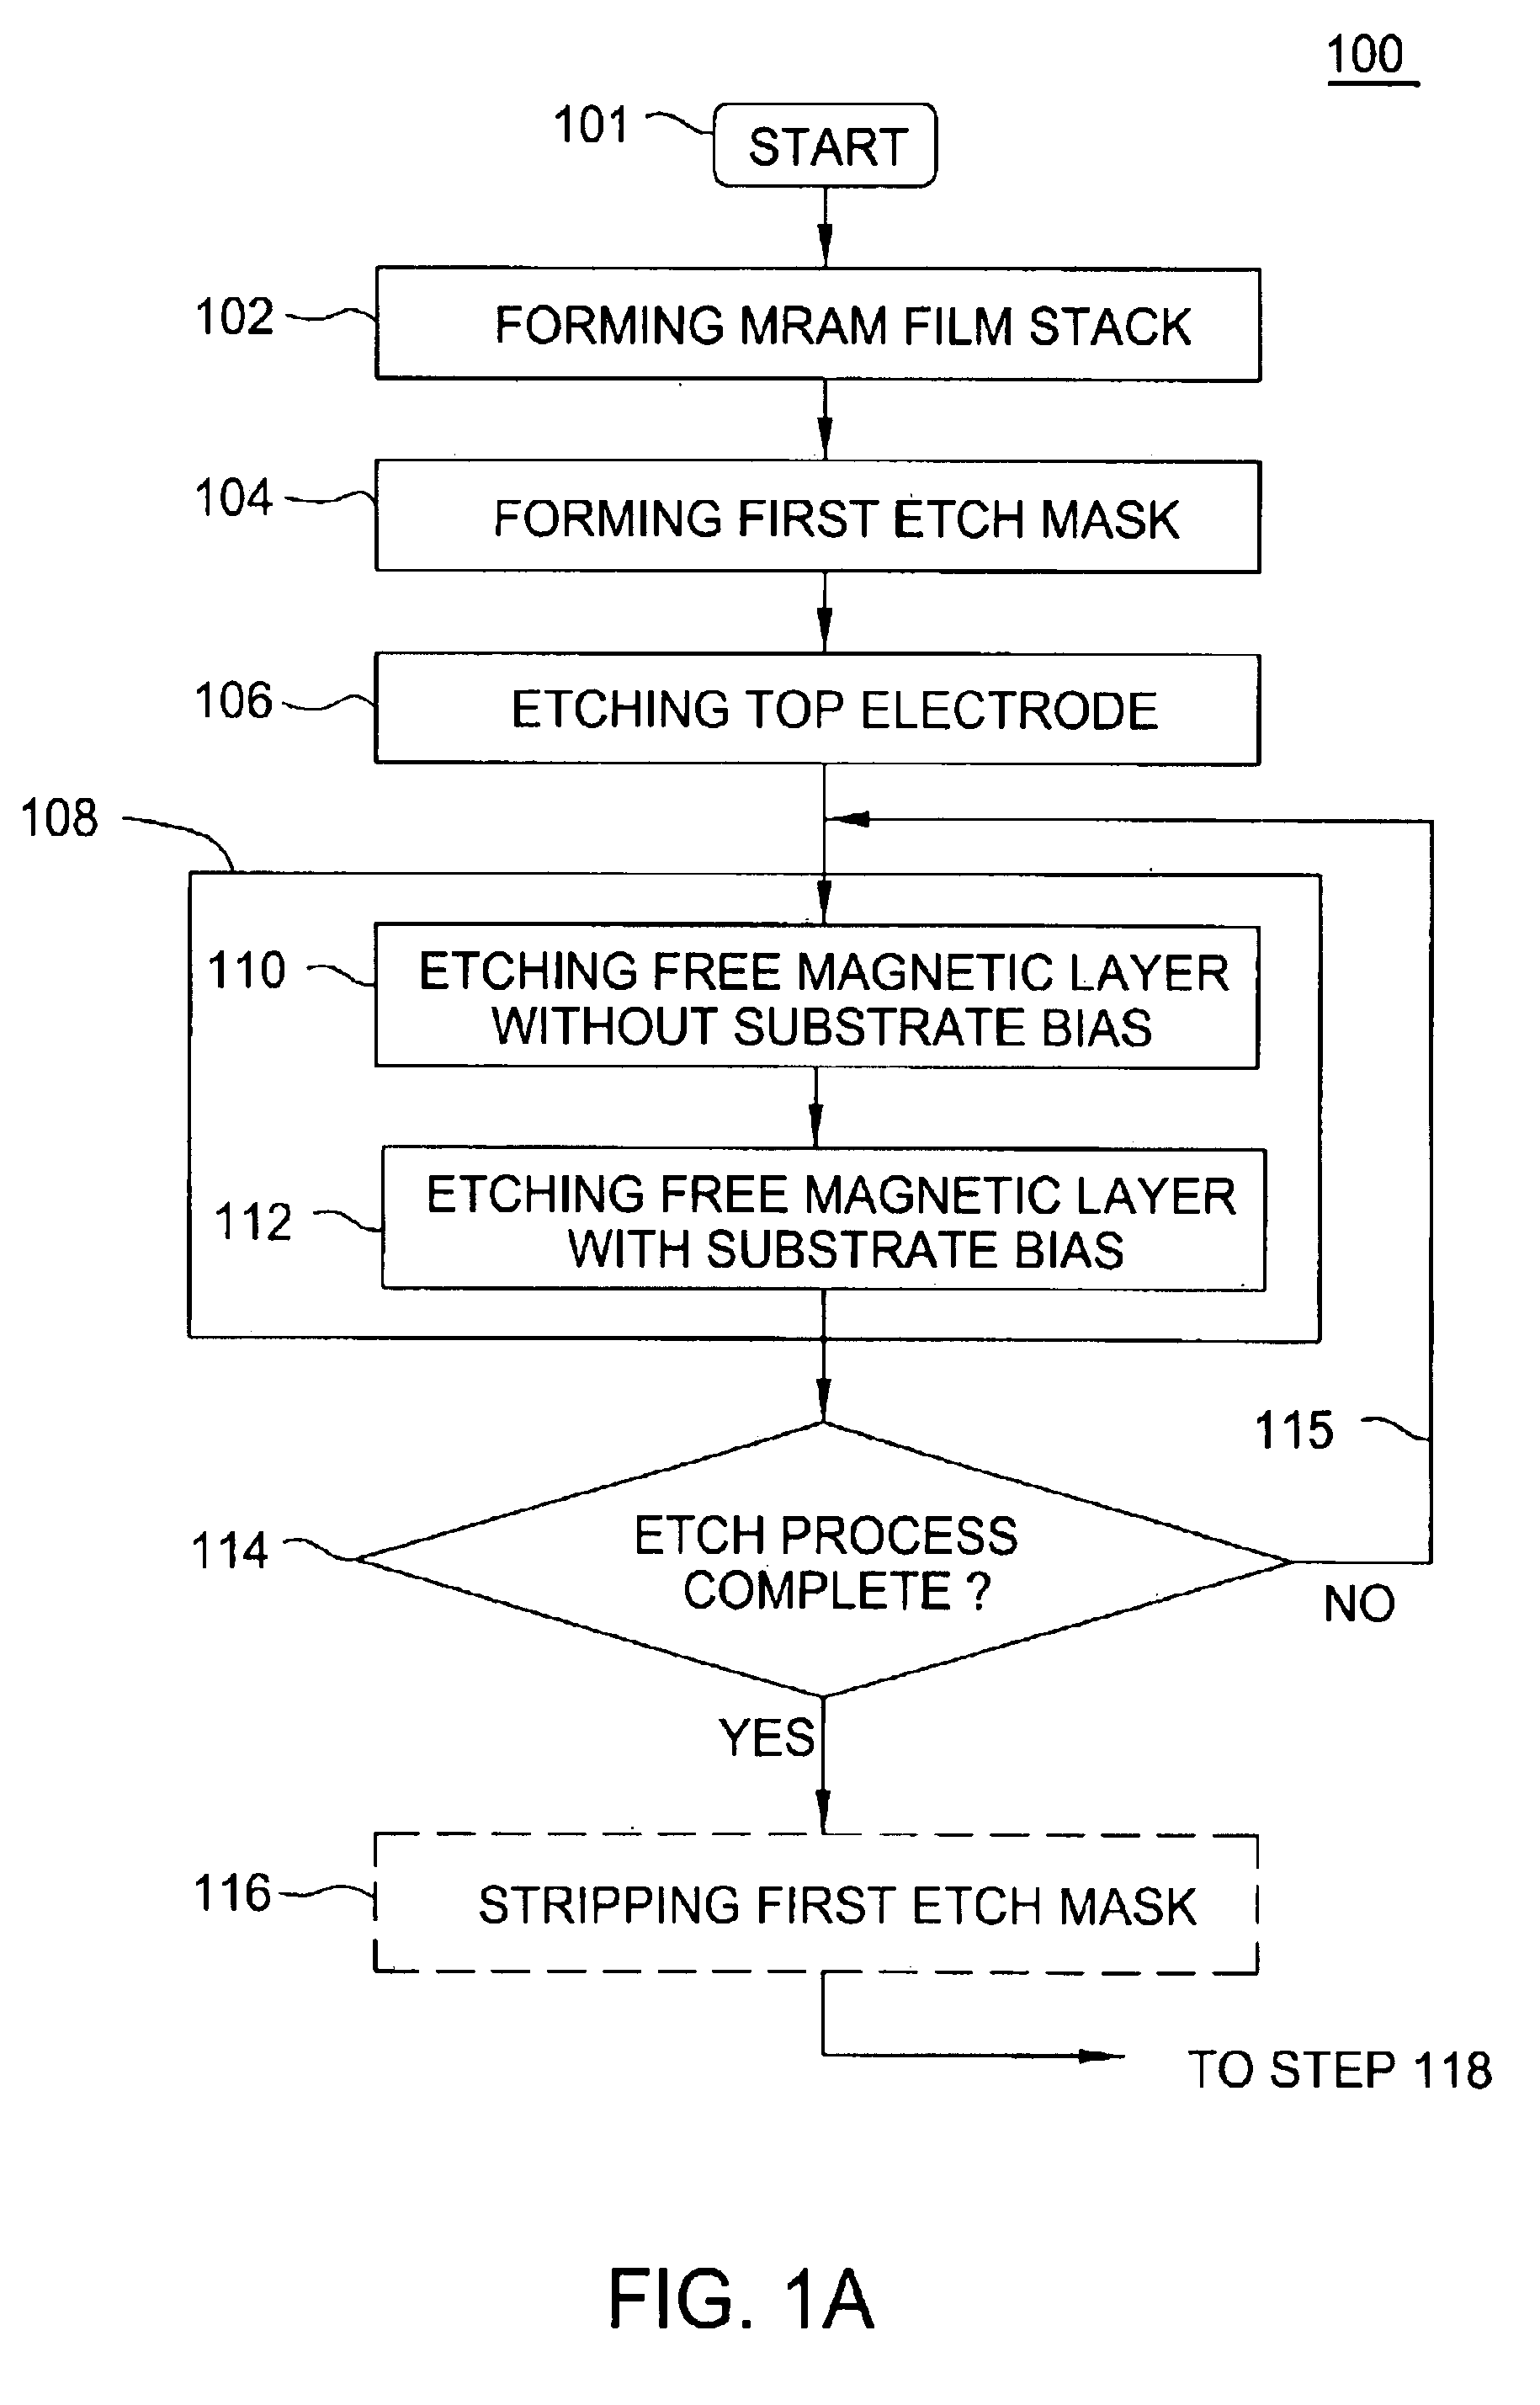 Method of etching magnetic and ferroelectric materials using a pulsed bias source